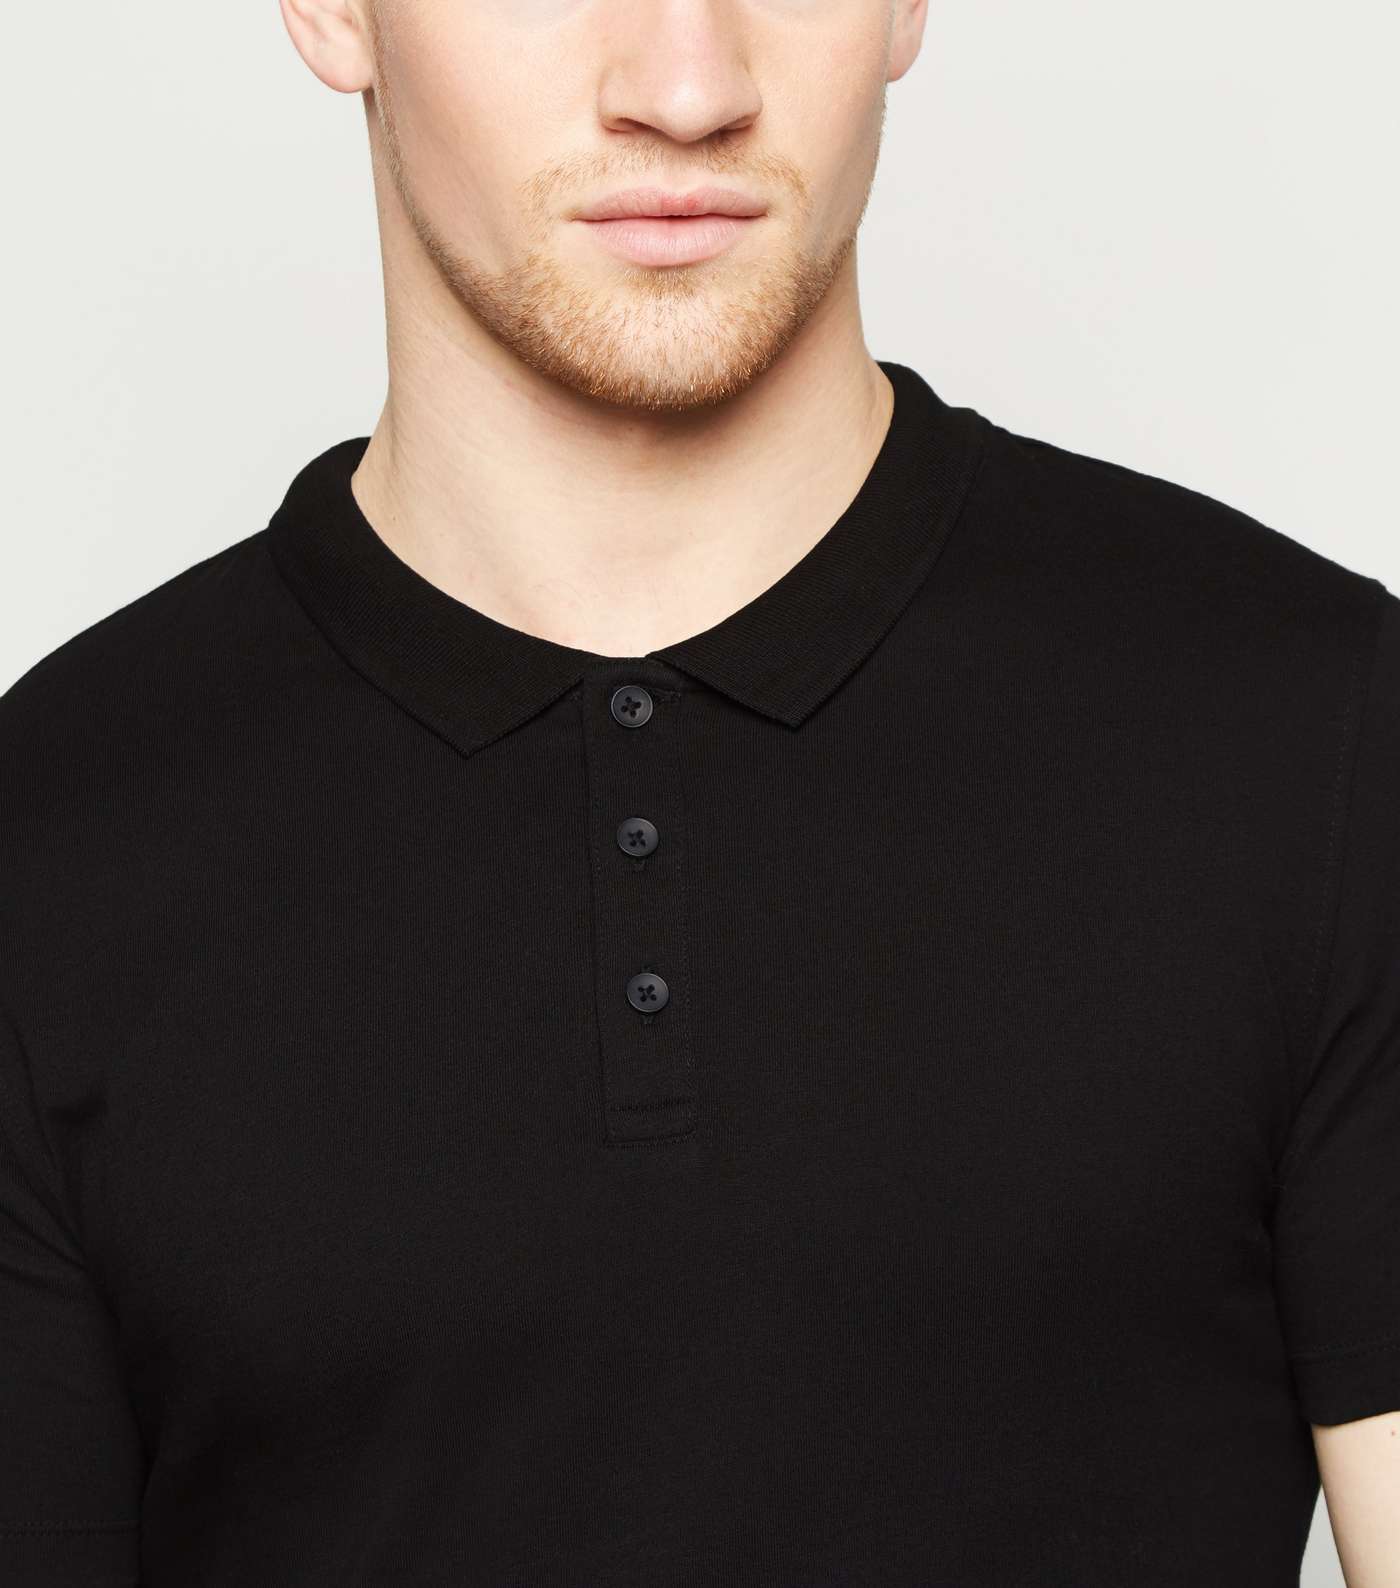 Black Muscle Fit Polo Shirt Image 5